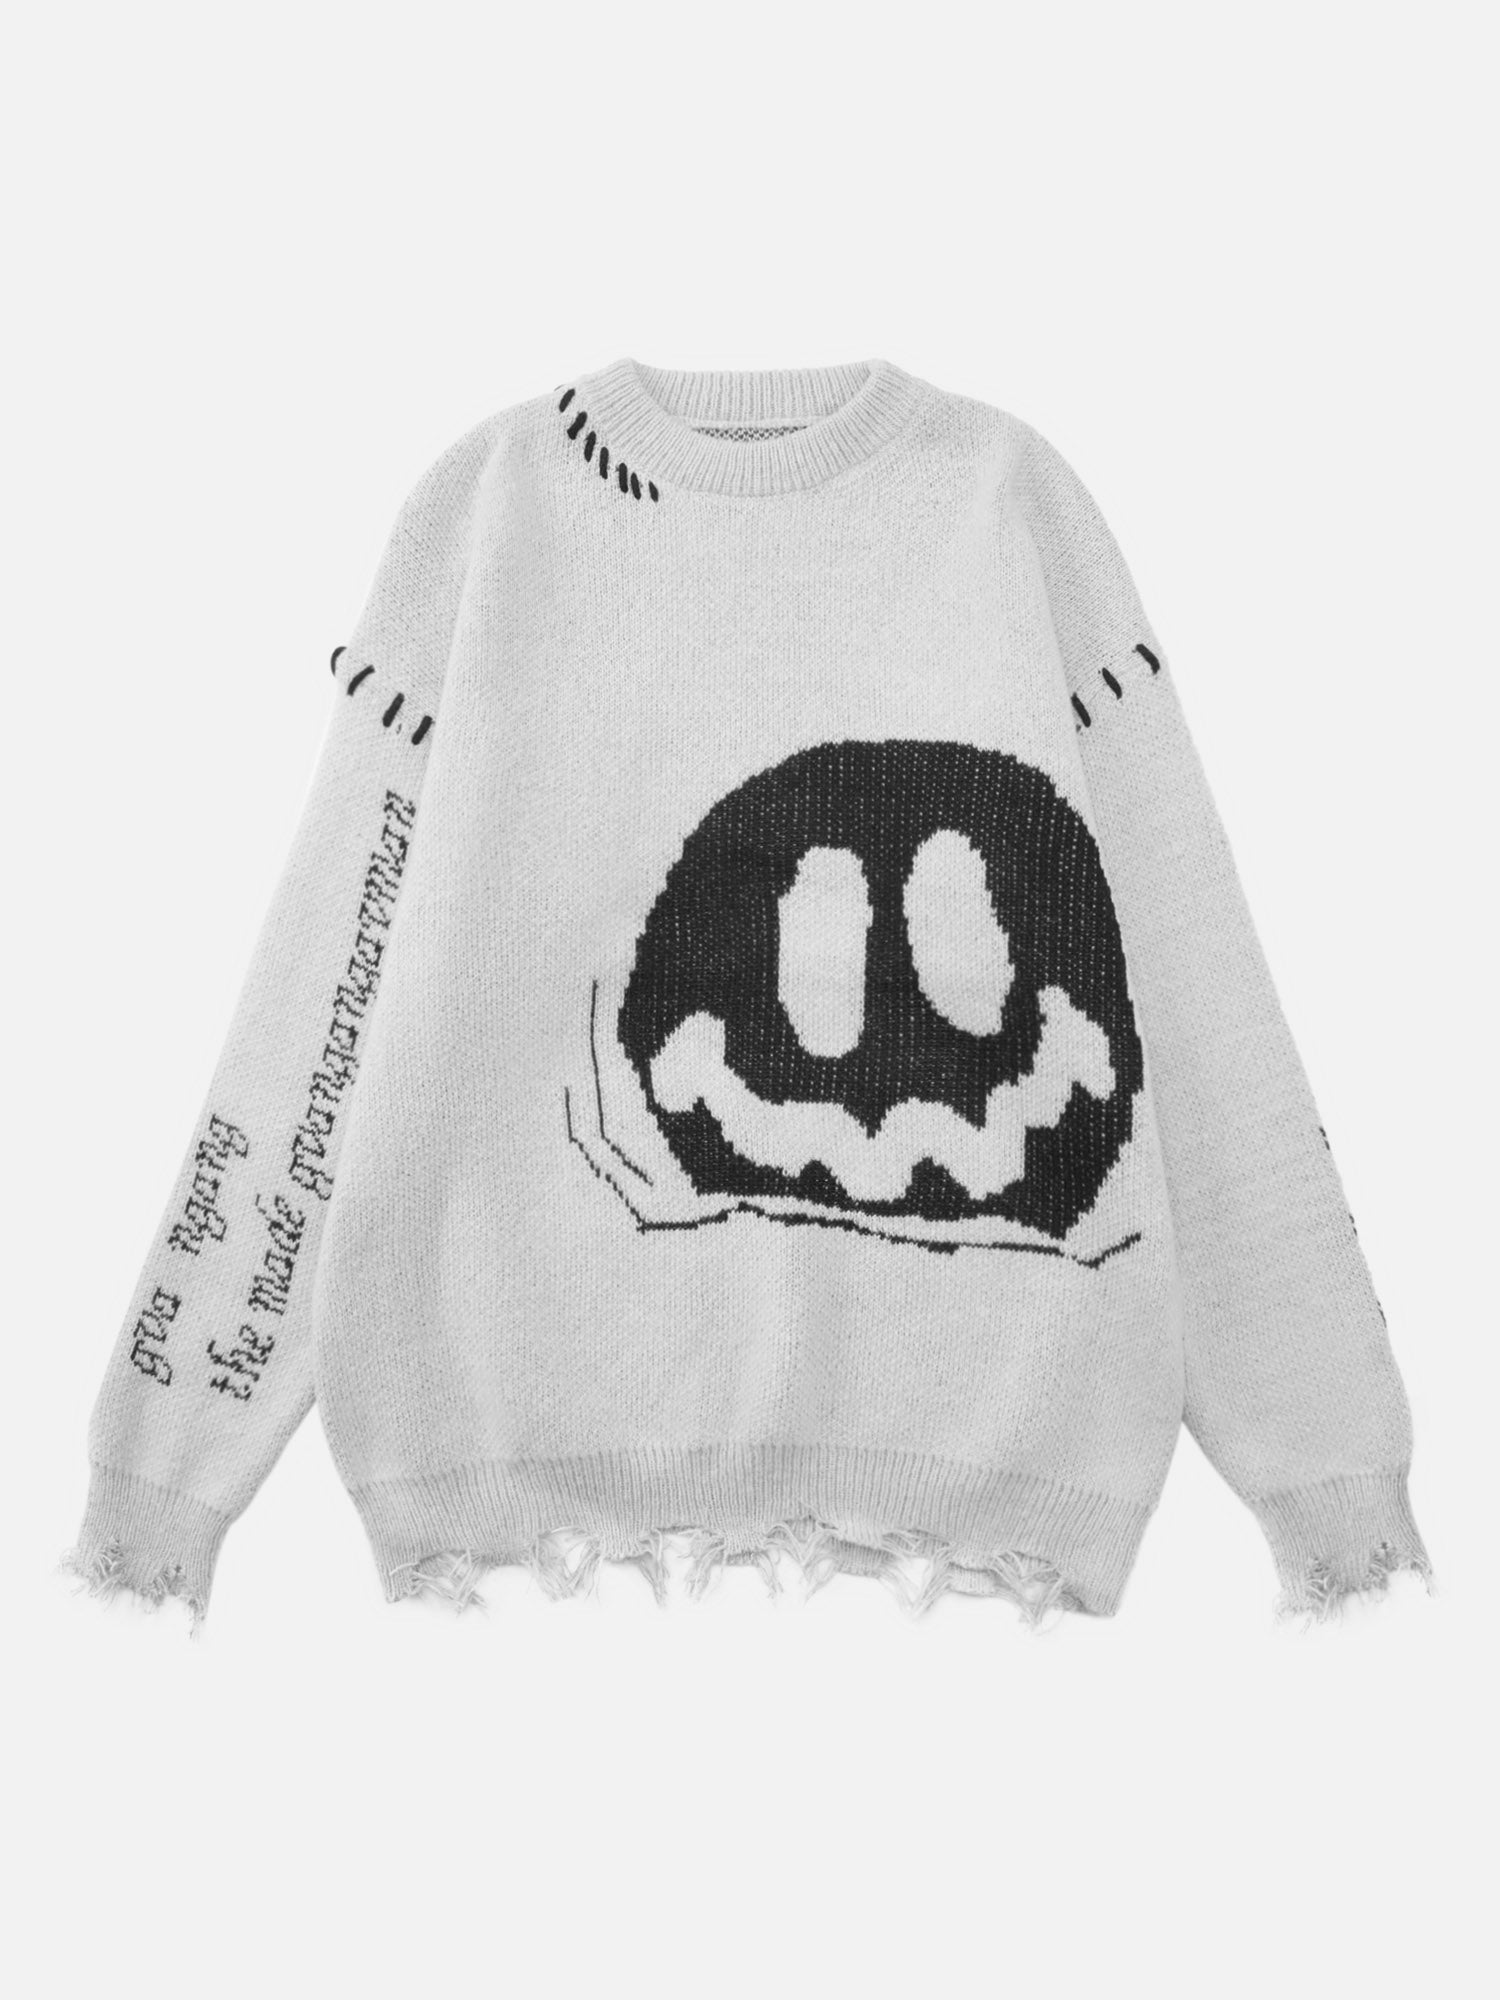 Thesupermade American Vintage Dark Smiley Face Round Neck Sweater